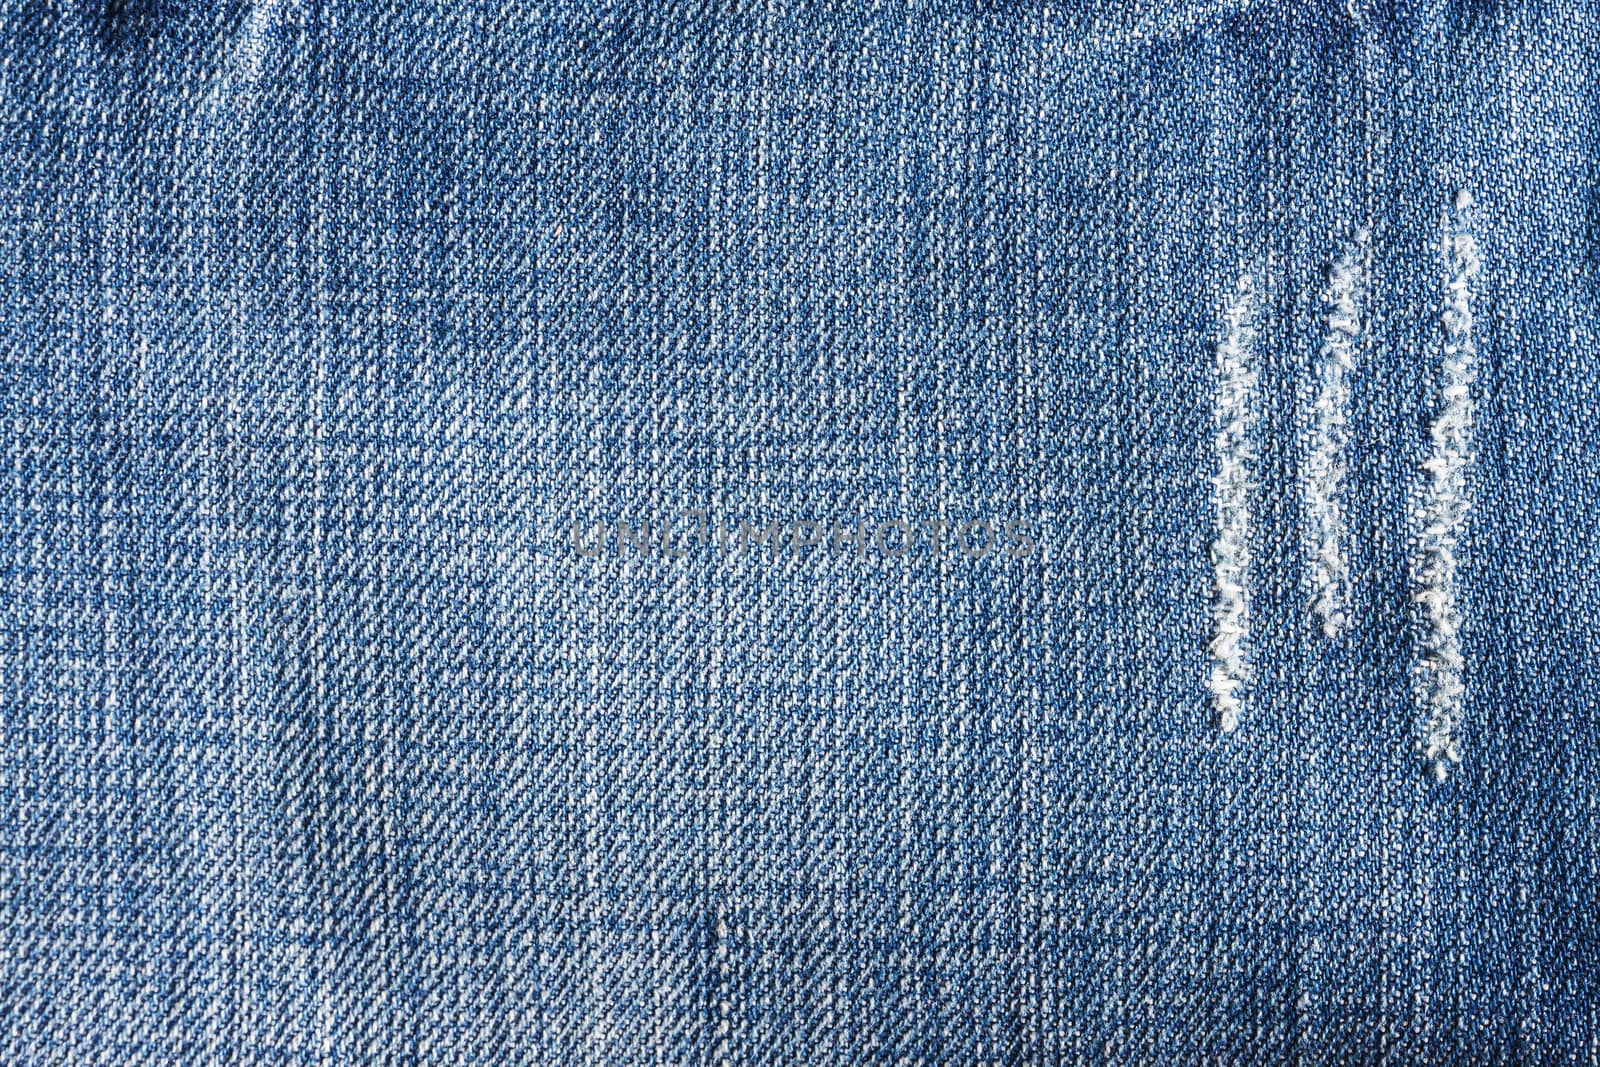 Jeans close-up, texture, torn, mopped pieces. by Tanacha